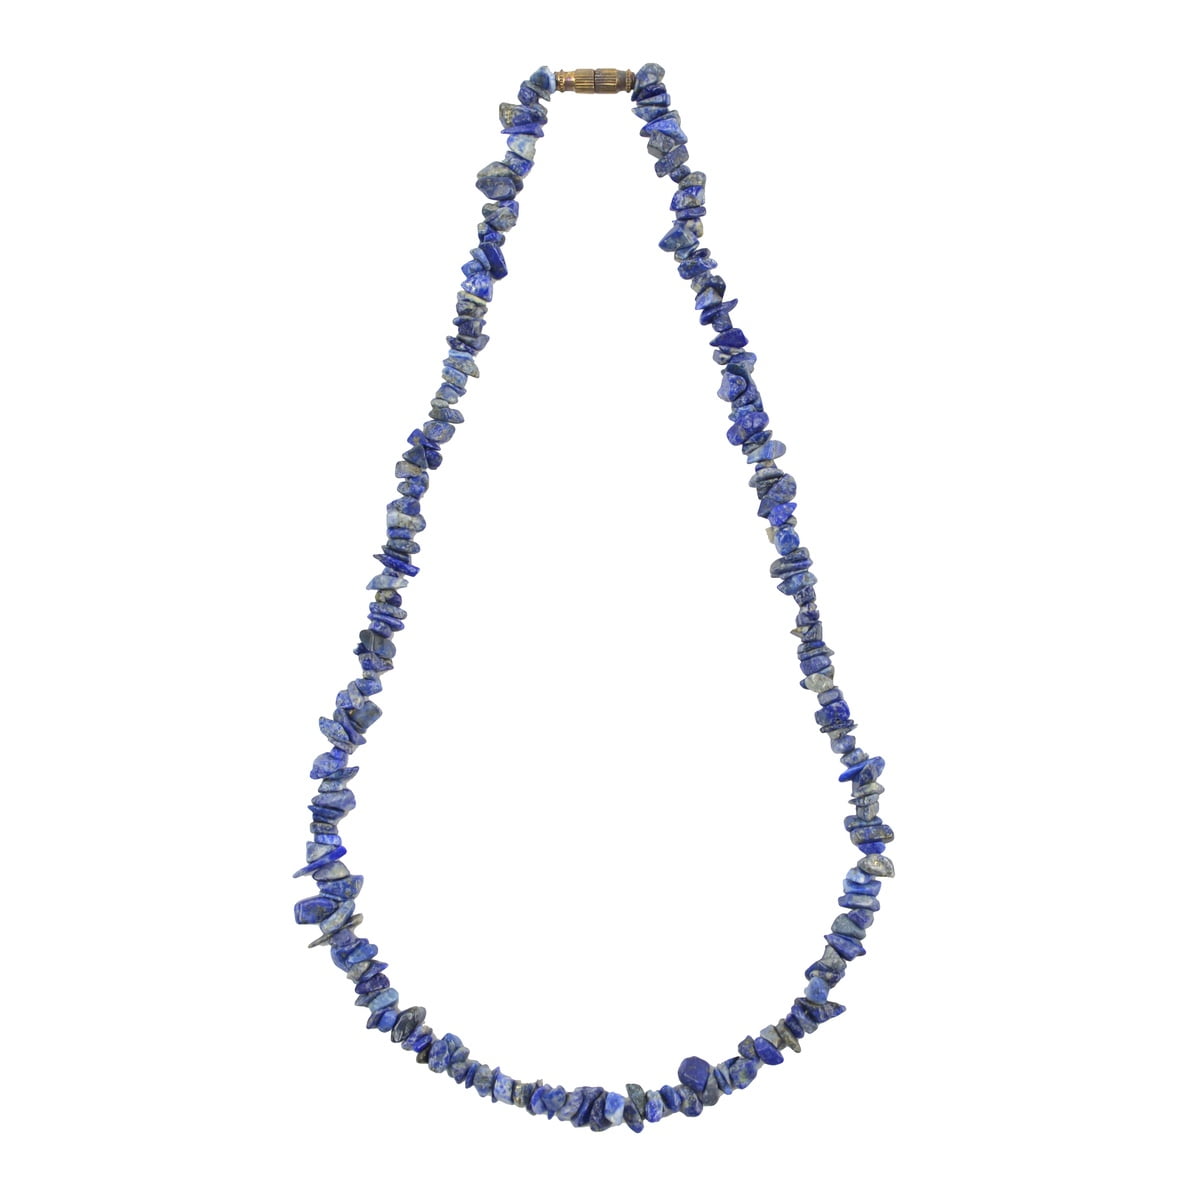 Semi-Precious Necklace/ Gift for Her Dainty Necklace. Women's Necklace Lapis Lazuli and Multi Quartz Necklace /Silver Sterling